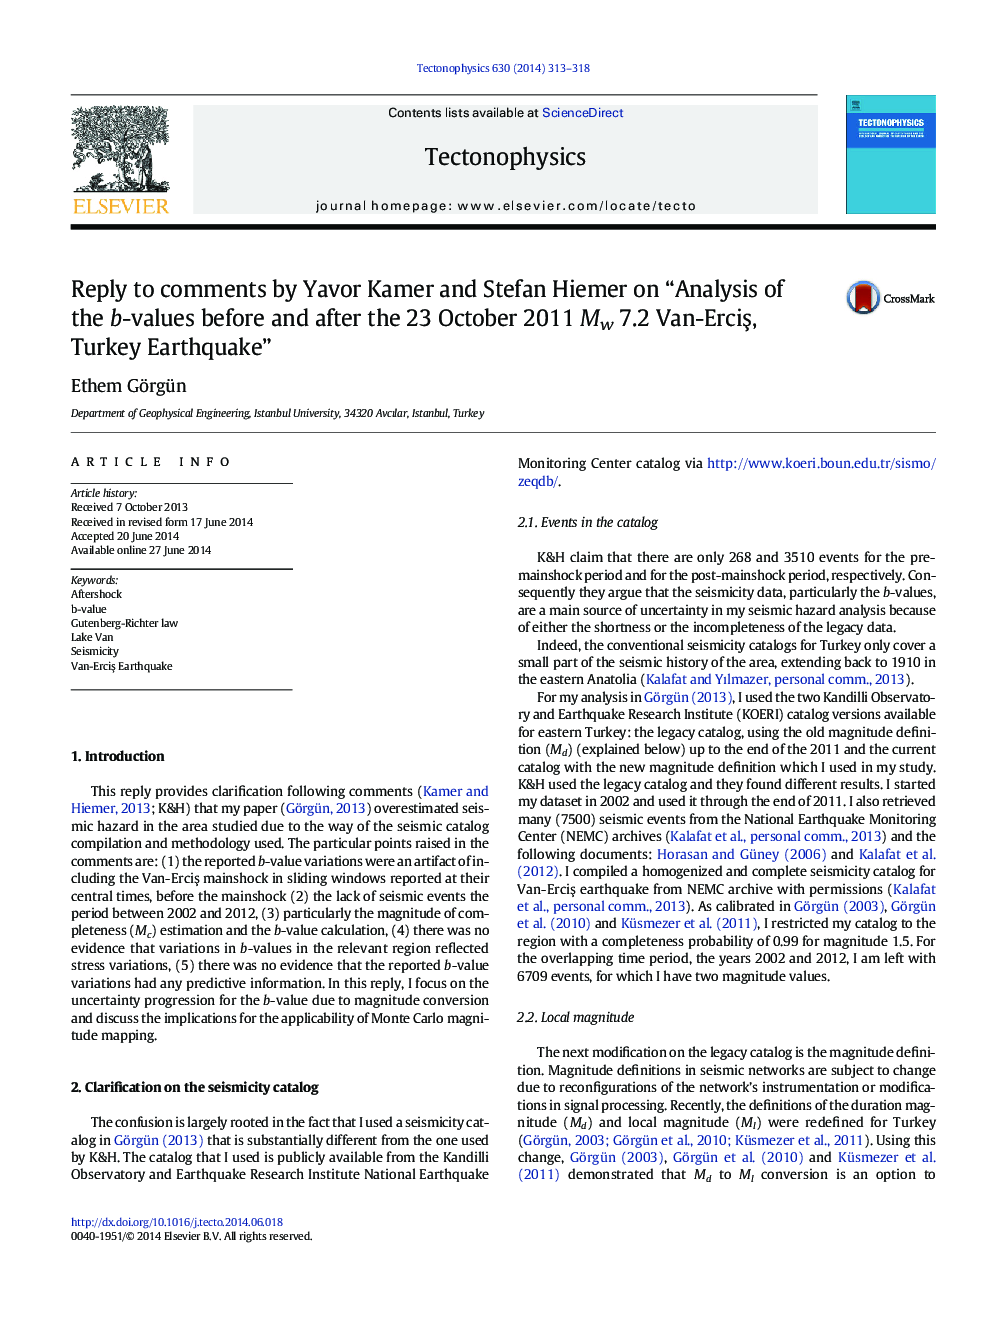 Reply to comments by Yavor Kamer and Stefan Hiemer on “Analysis of the b-values before and after the 23 October 2011 Mw 7.2 Van-ErciÅ, Turkey Earthquake”